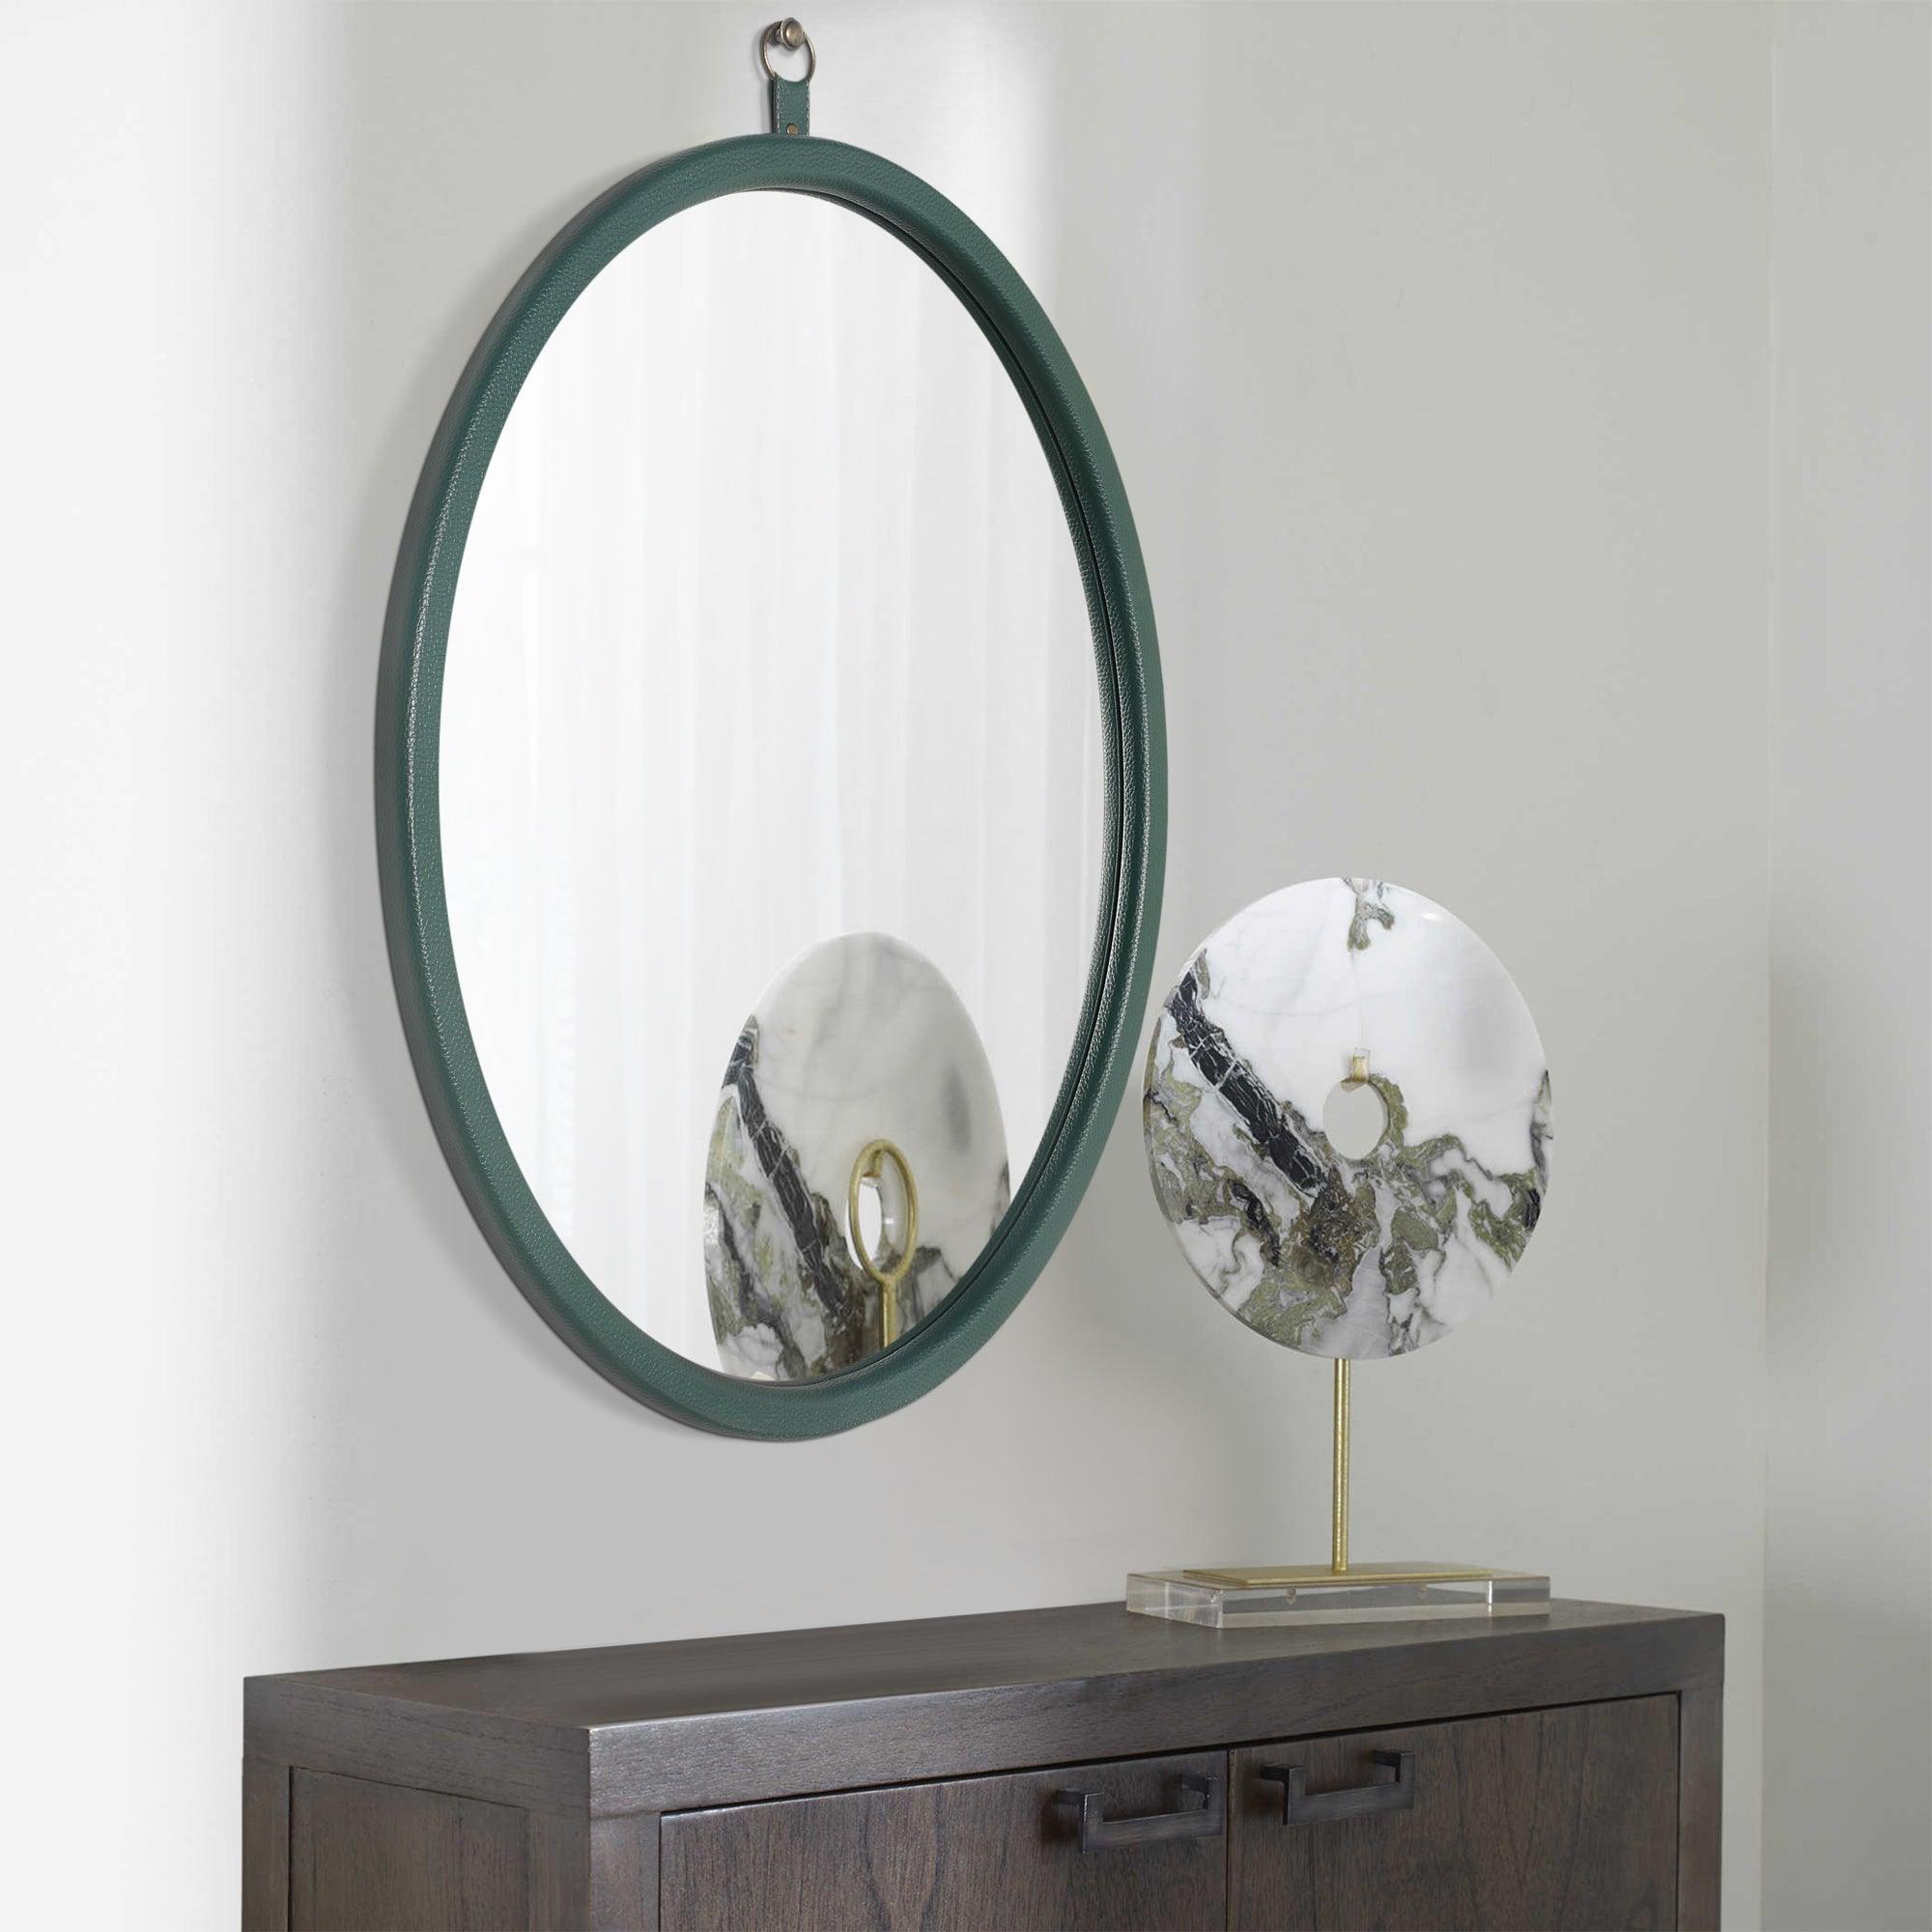 🆓🚛 Oval Green Decorative Wall Hanging Mirror, Pu Covered Mdf Framed Mirror for Bedroom Living Room Vanity Entryway Wall Decor, 23.62X29.92"